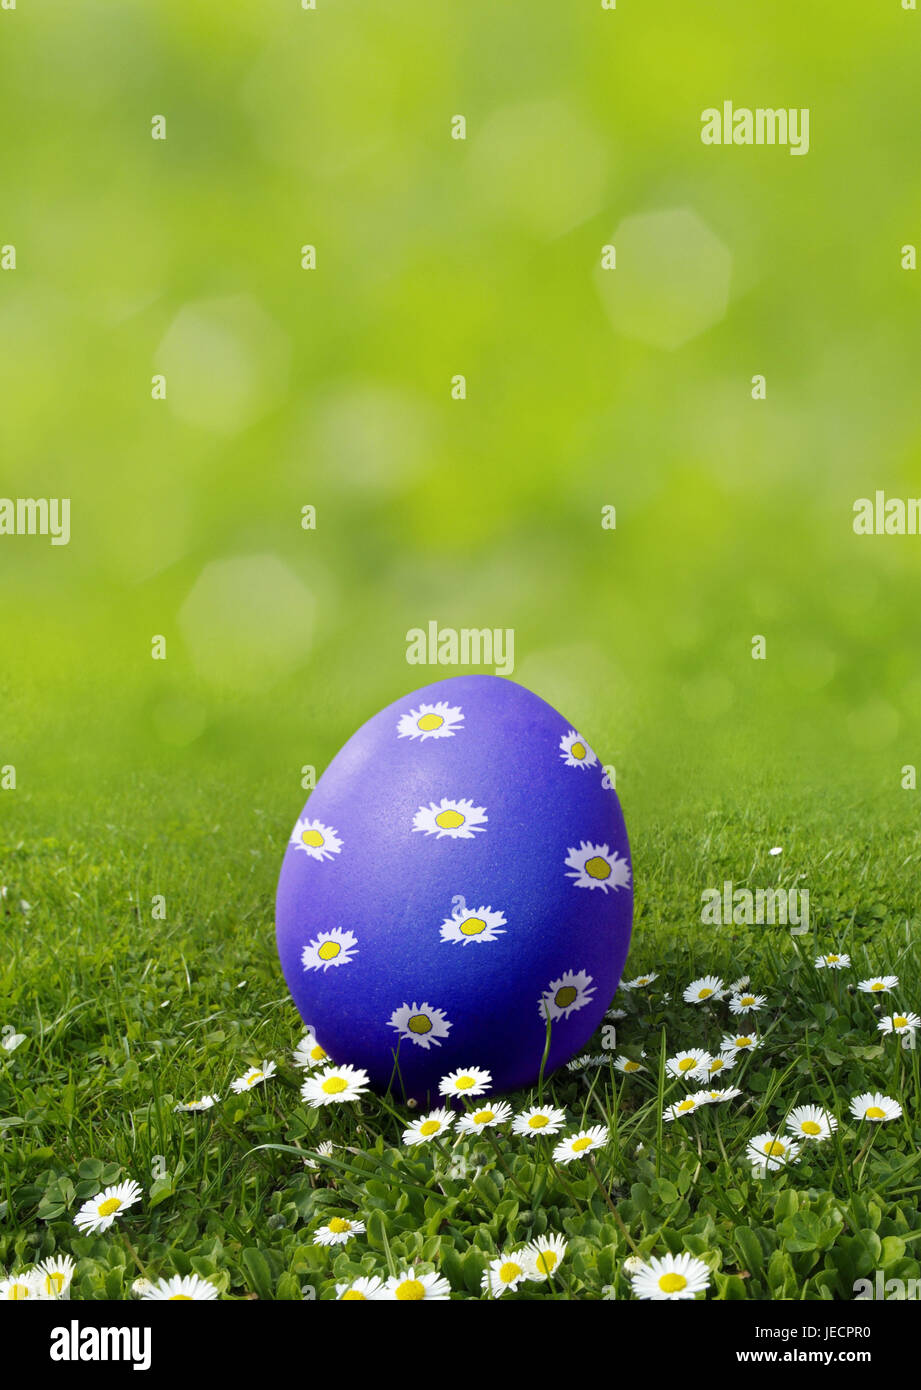 Easter, meadow, daisy, Easter egg, blue, paints, blossoms, egg search, [M], grass, flower meadow, spring meadow, flowers, little flowers, culture, feast, Easter feast, Easter time, Easter traditions, tradition, österlich, egg, Hühnerei, one, individually, tintedly, brightly, sample, flowers, little flowers, Blümchenmuster, sweetly, Easter motif, season, icon, spring, Easter Sunday, childhood, Easter egg hunt, Easter hiding place, Stock Photo